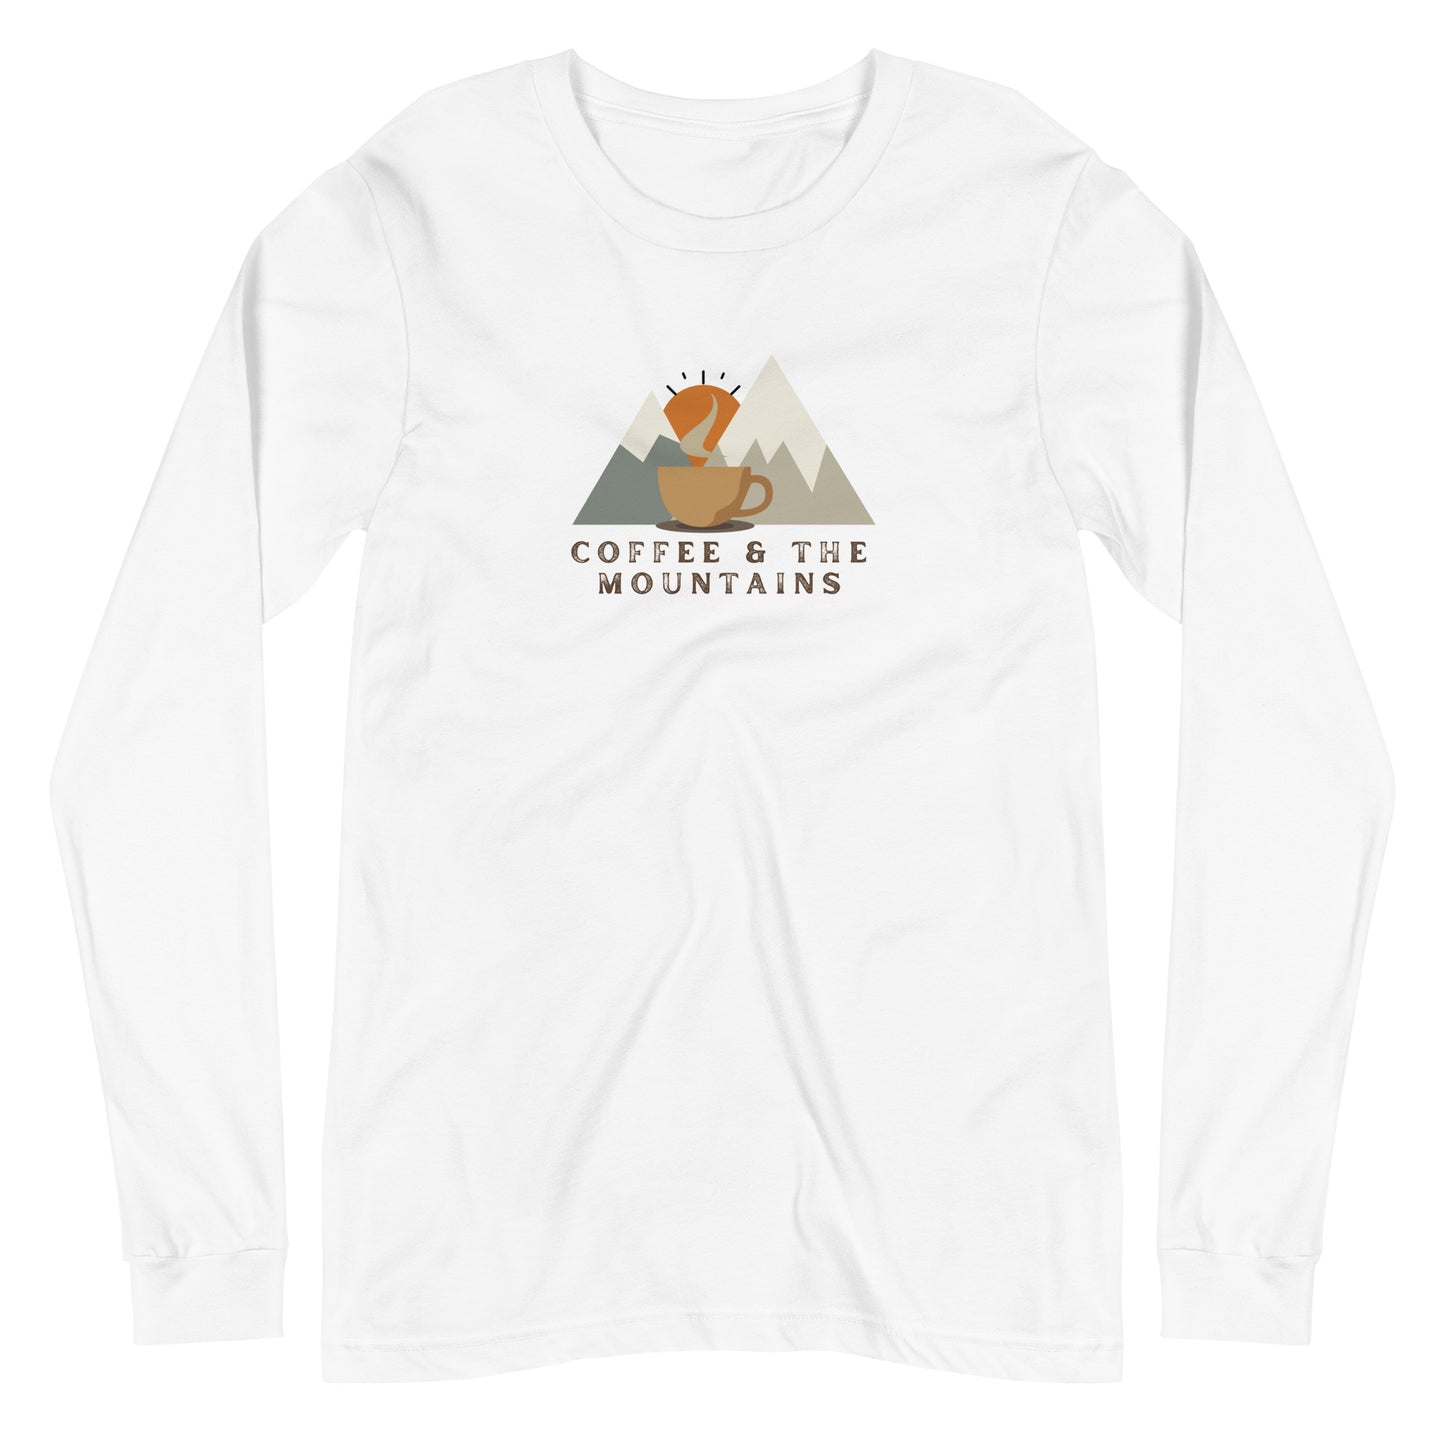 Women's Bella + Canvas Long Sleeve (Coffee & the Mountains)